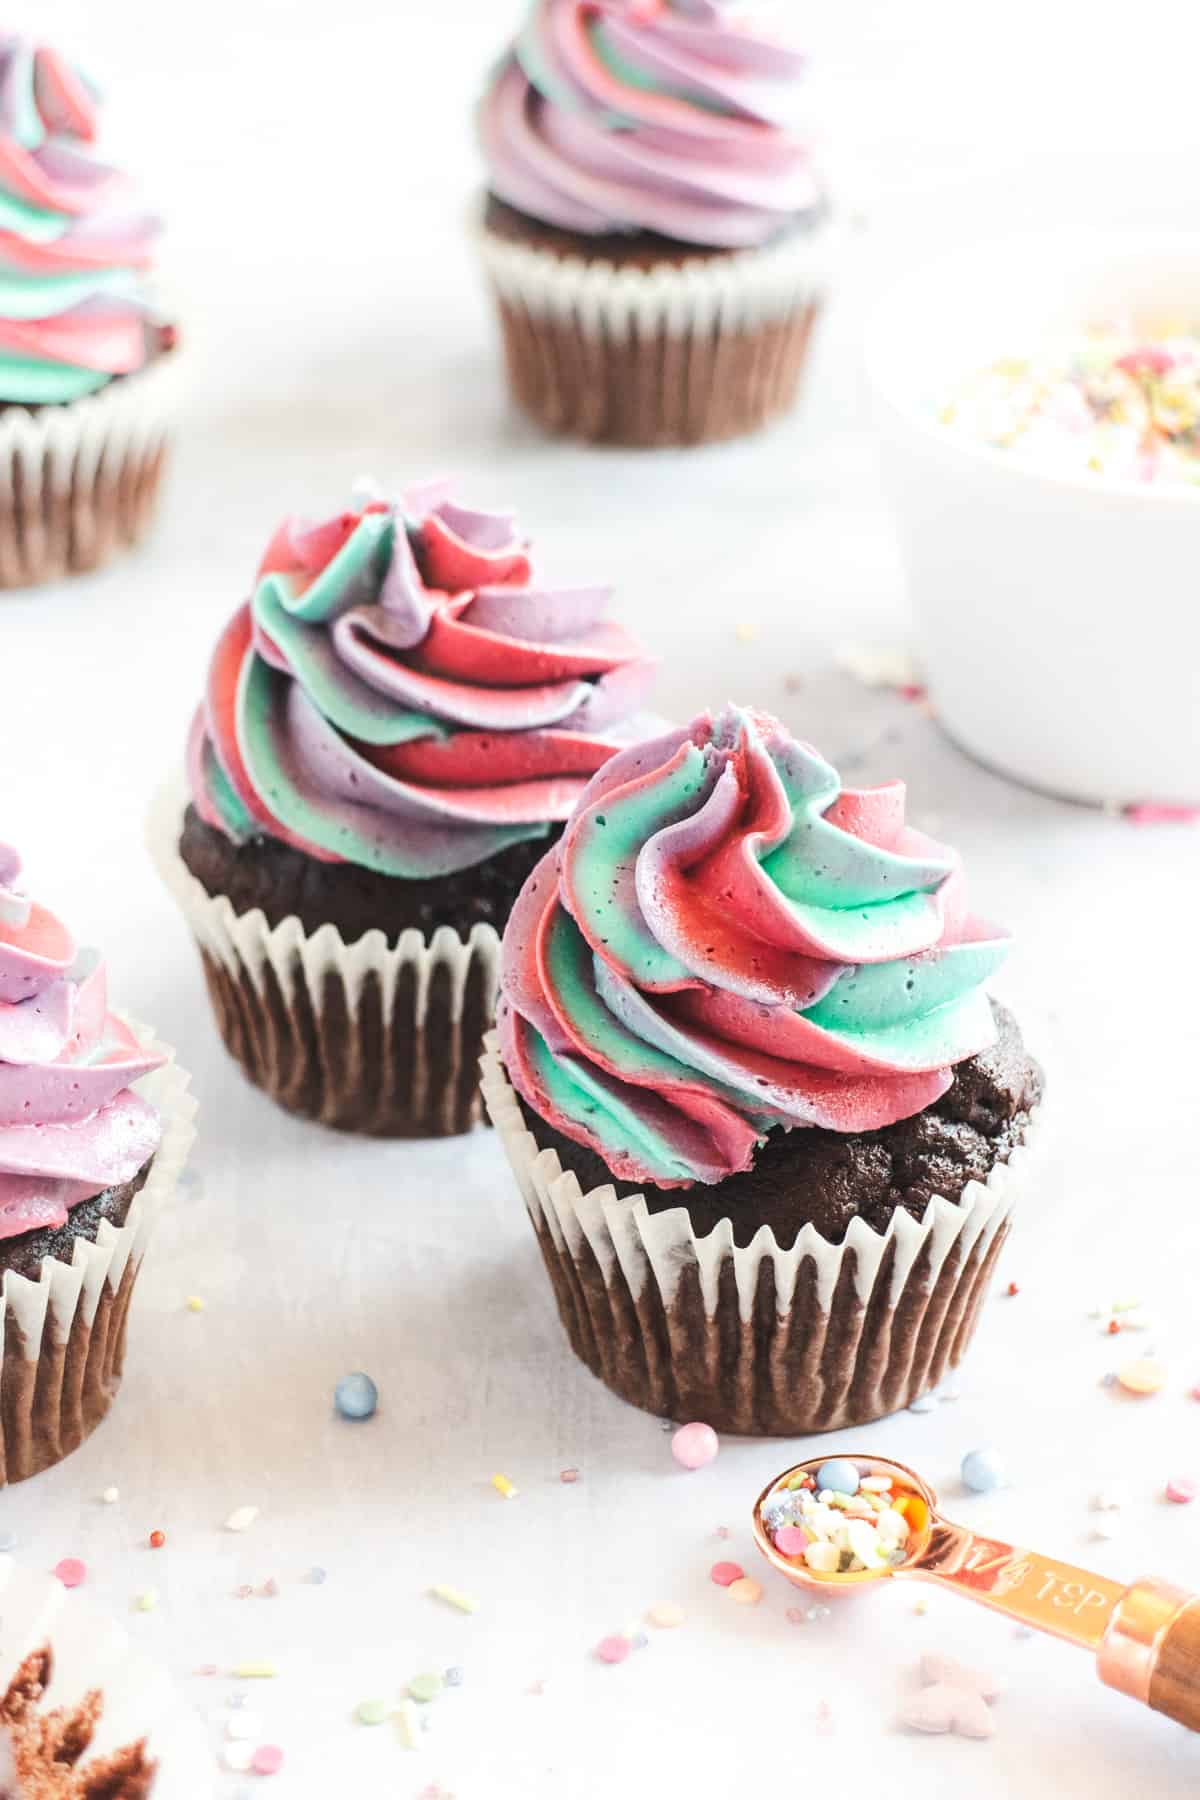 Chocolate cupcakes decorated with multi-coloured frosting